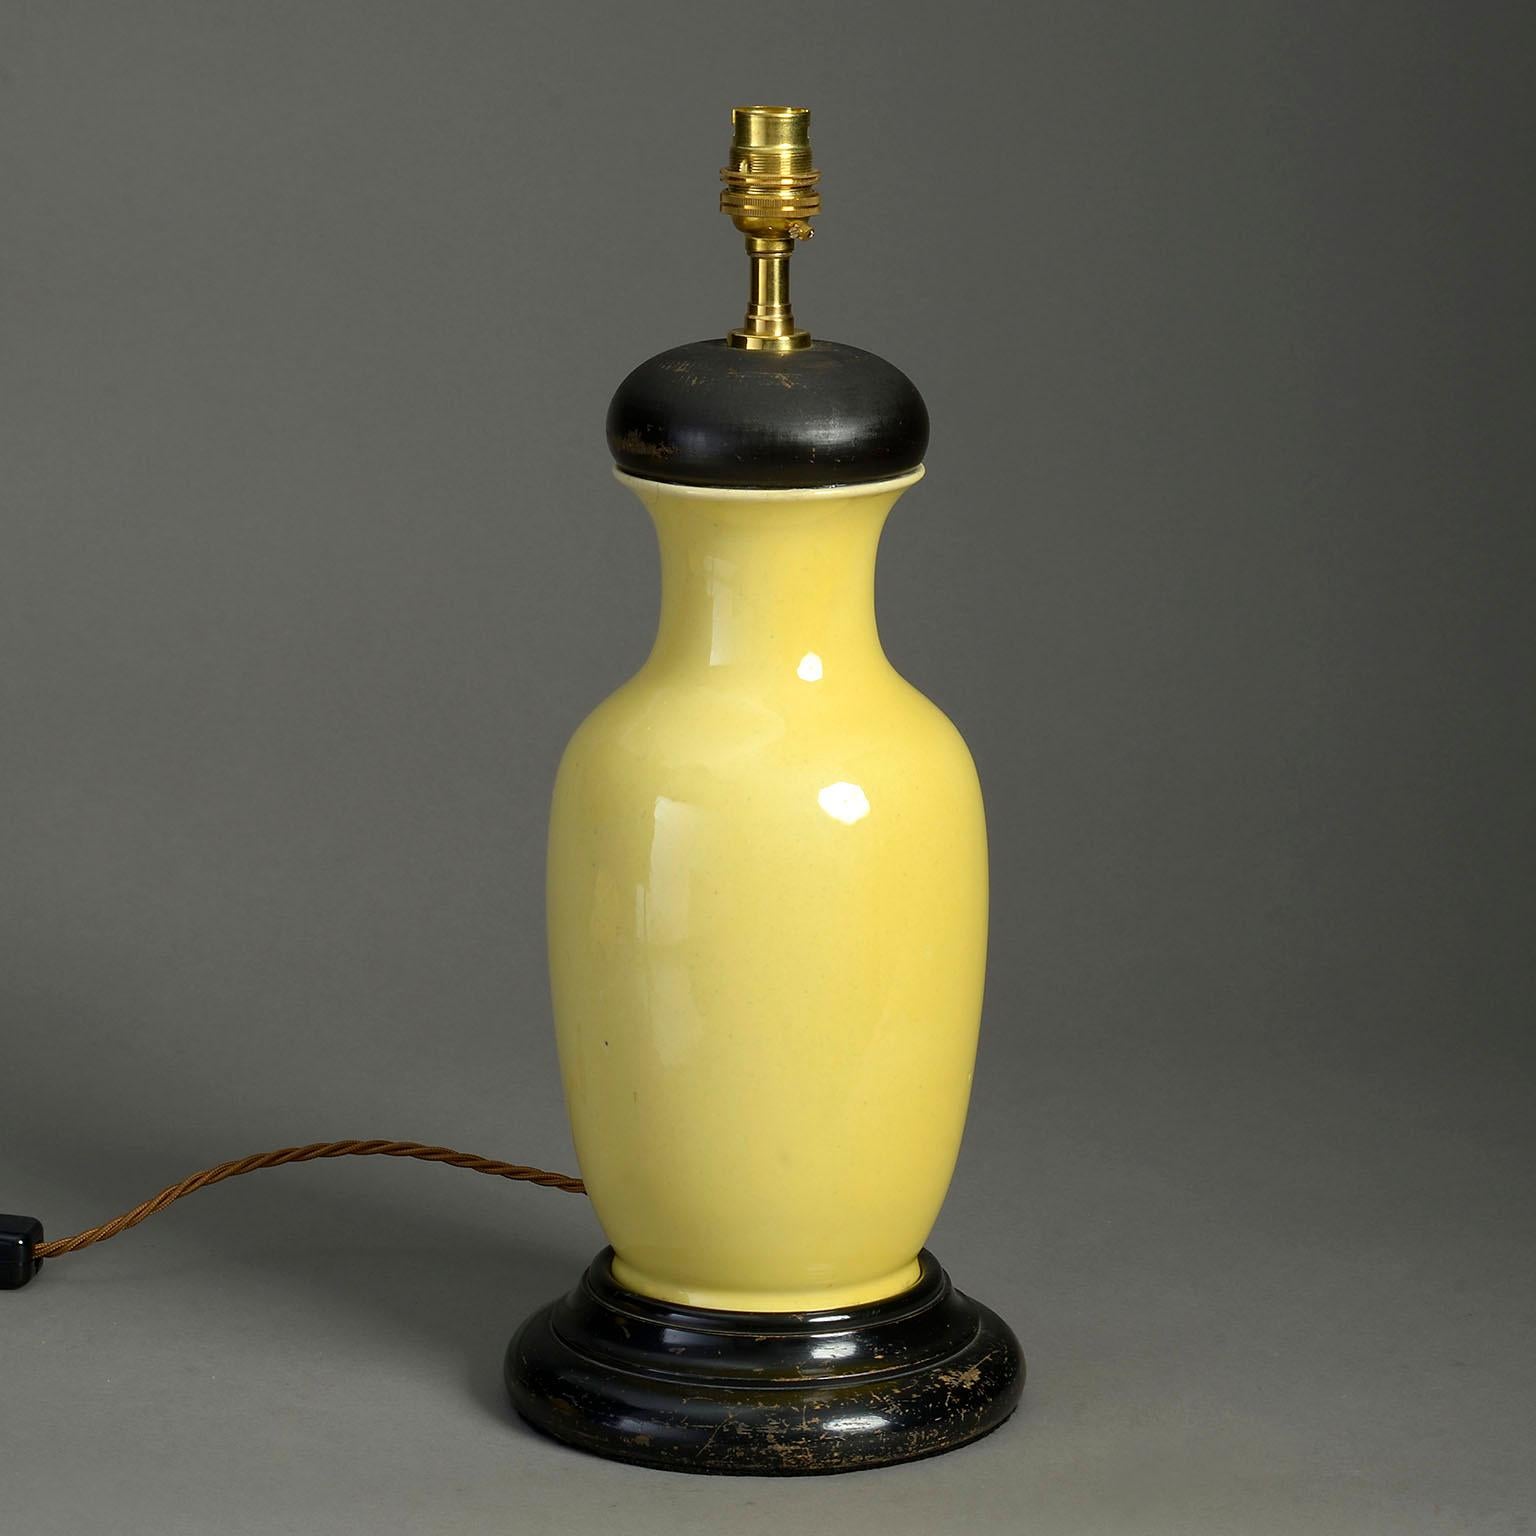 A late 19th century yellow glazed pottery baluster vase, mounted as a table lamp with turned ebonised cap and turned base.

